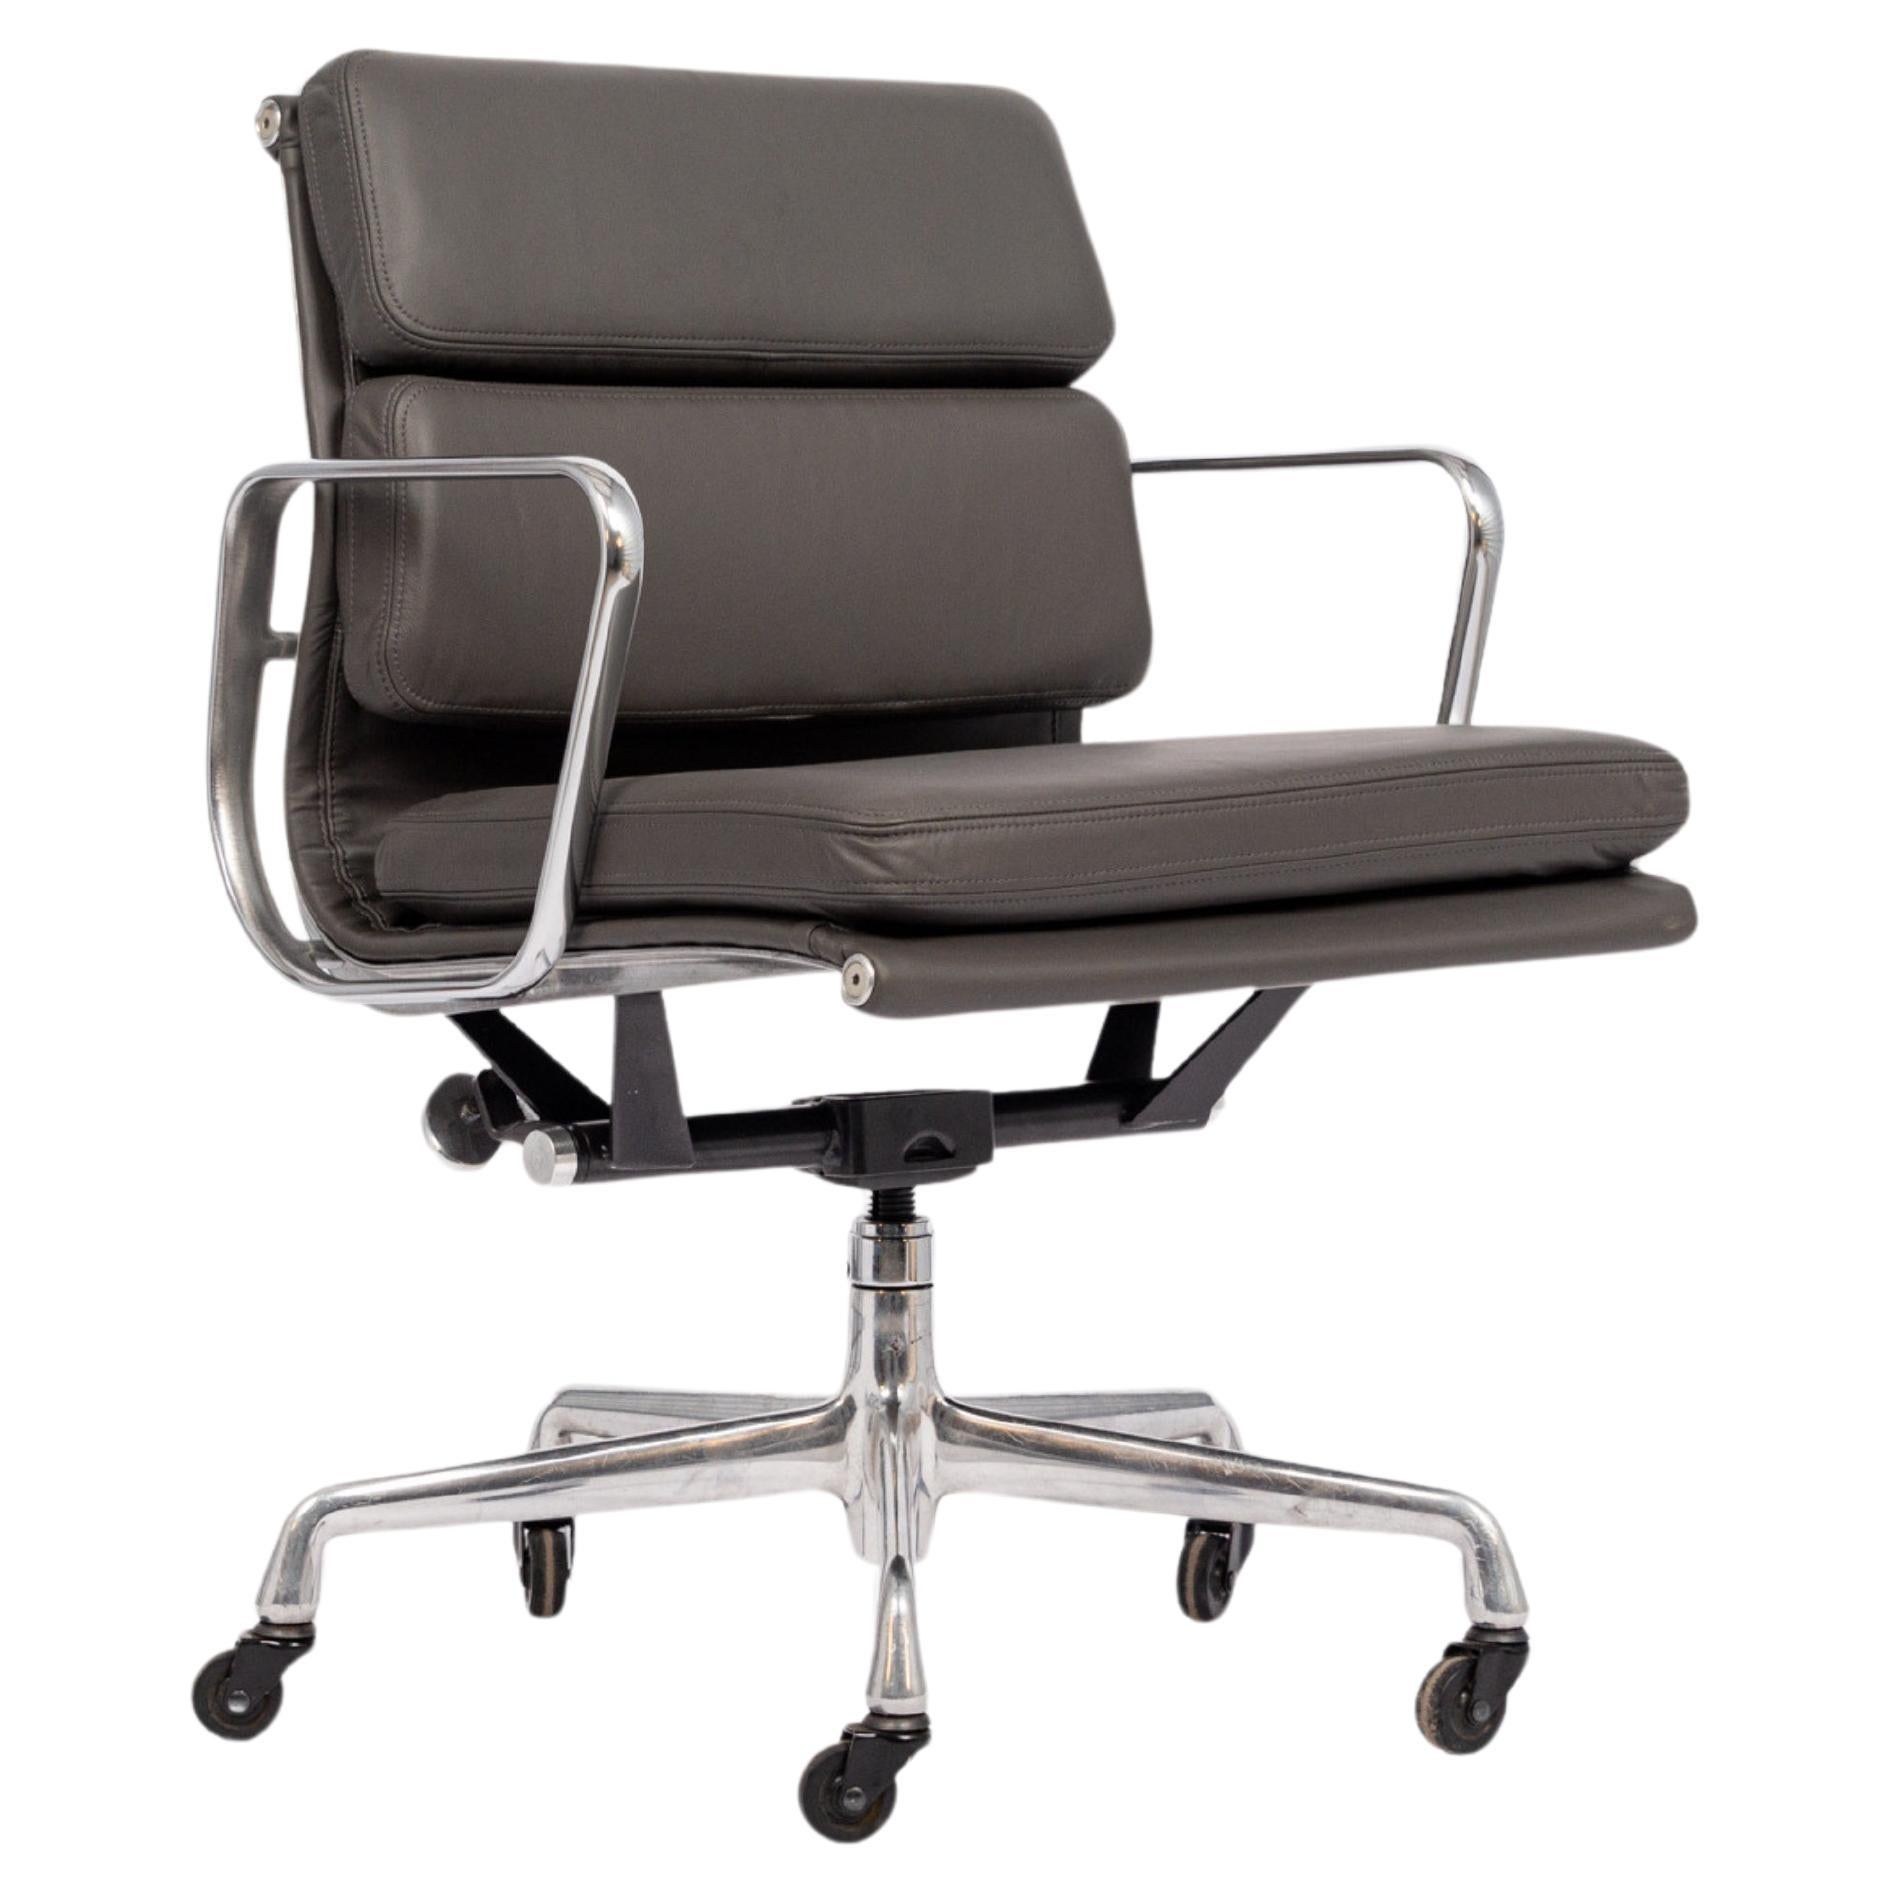 Original Dark Gray Leather Office Chair by Eames for Herman Miller